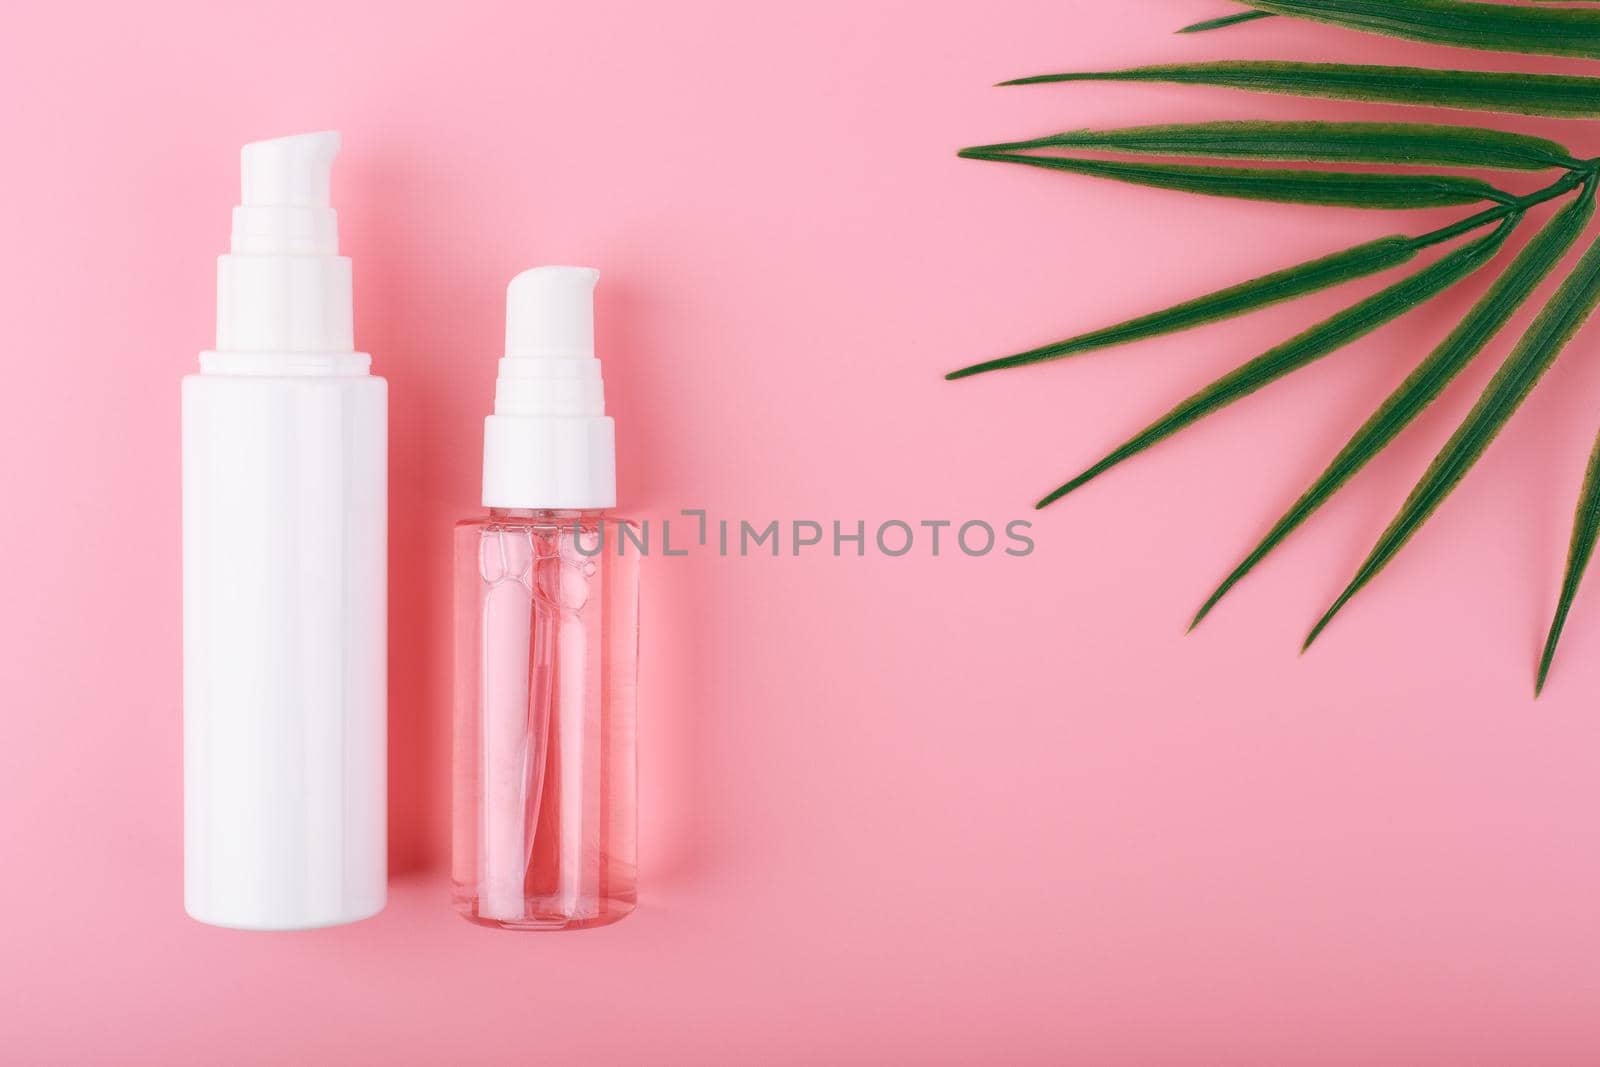 Set of cosmetic bottles for face cleansing, exfoliating and moisturizing against pink background with copy space and palm leaf. Trendy modern flat lay with a set of beauty products for daily use 